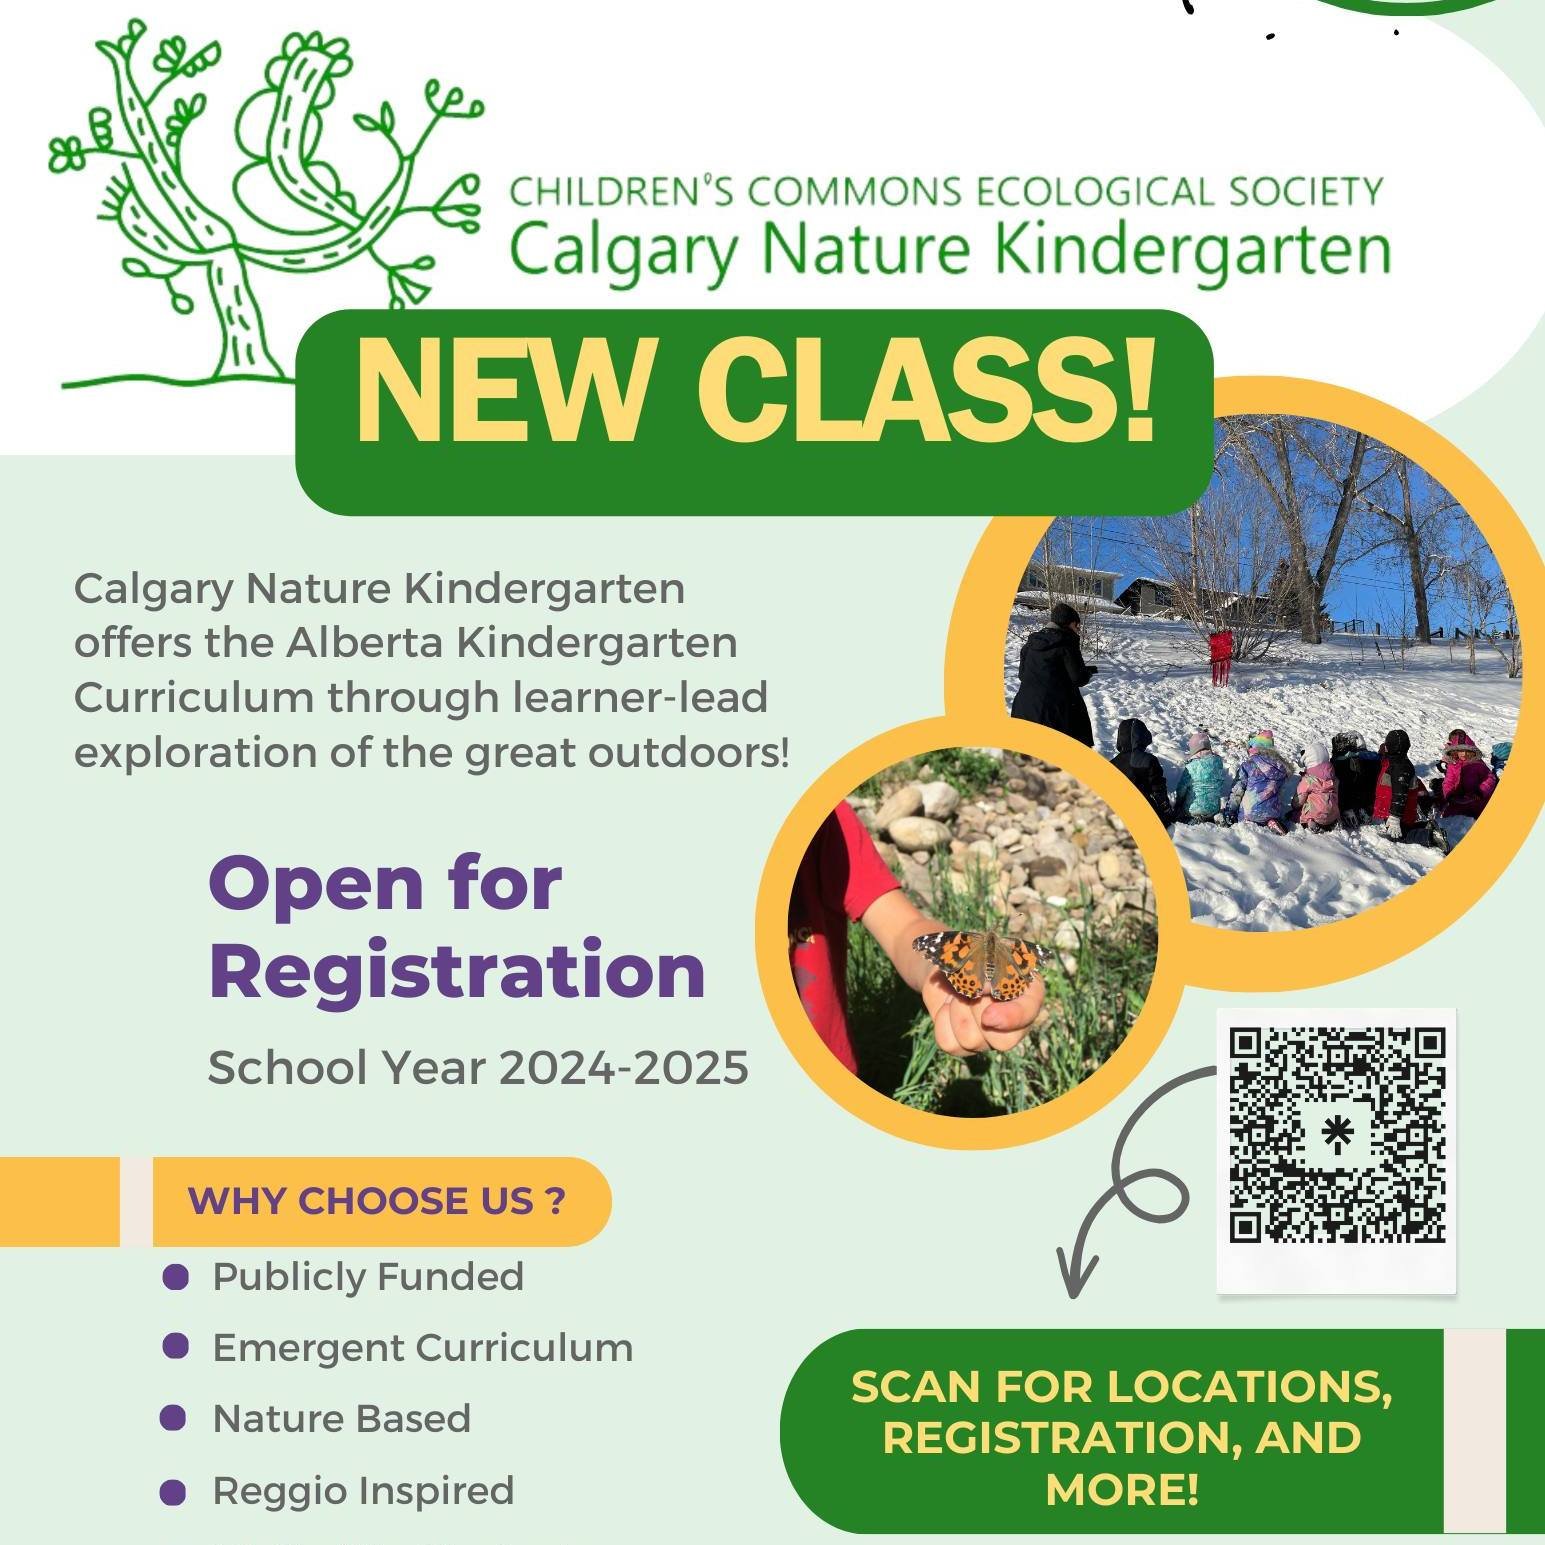 New Class At Our Red Deer Lake United Church Location! ✏️

We have once again extended our Registration deadline to help fill our new class at our Red Deer Lake United Church location!

Registration will remain open until we have filled this new clas